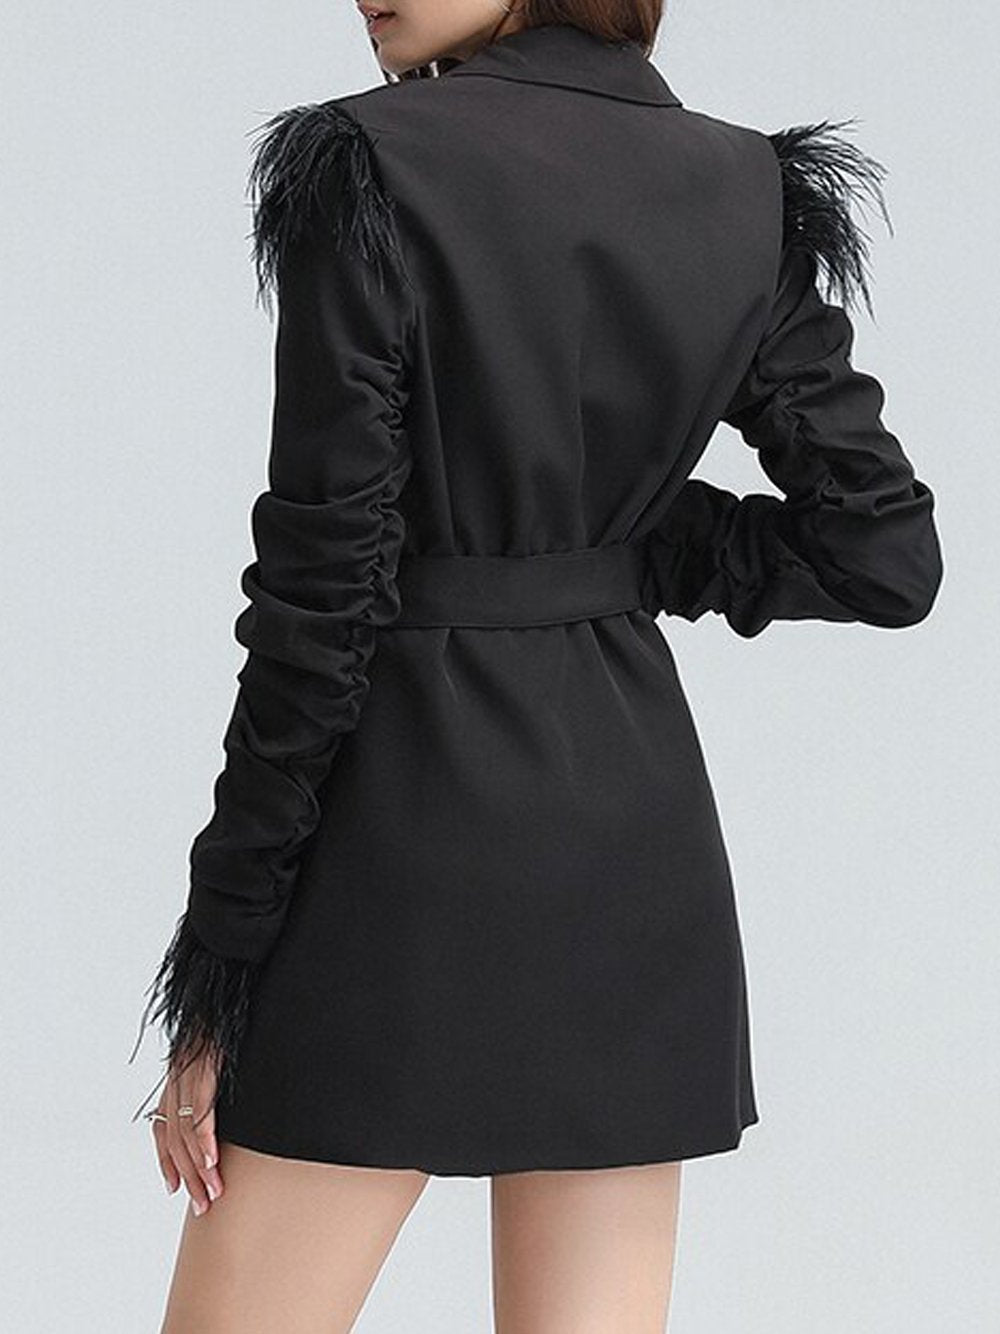 Ruched Feathers Blazer Dress